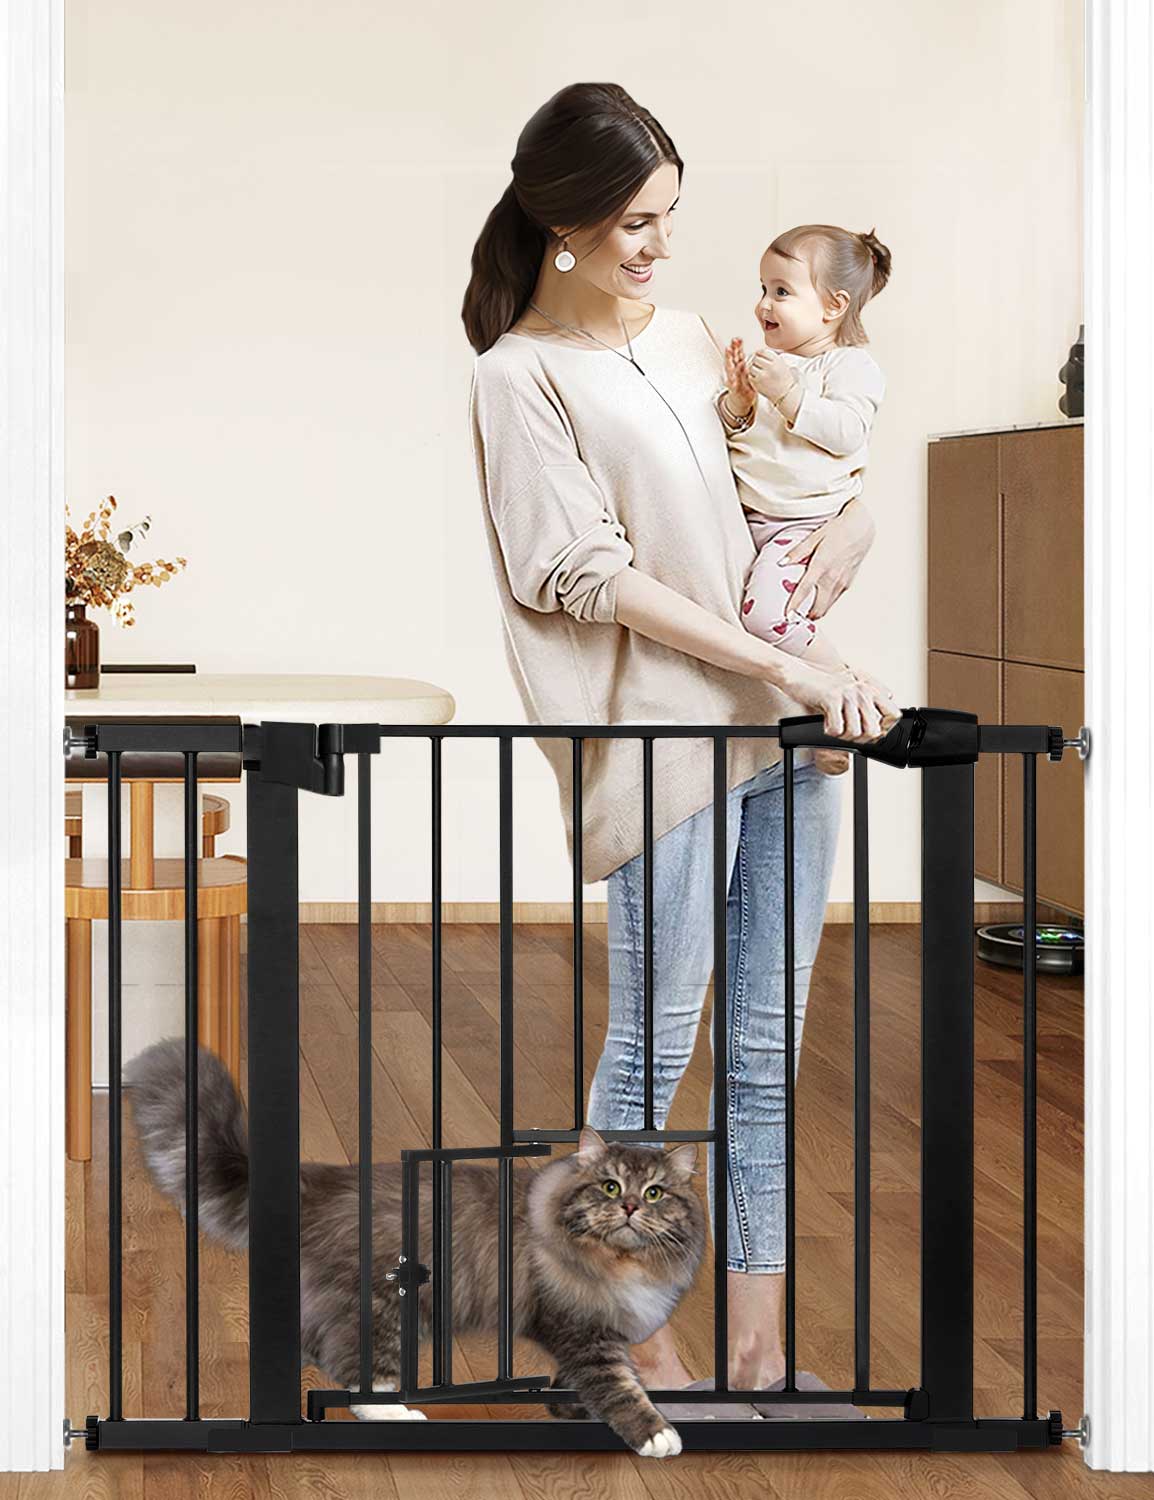 Baby Safety Gate 30"Tall 29.5''-40.5''Wide Doorway Baby Gate with Pet Door, Black - image 1 of 13